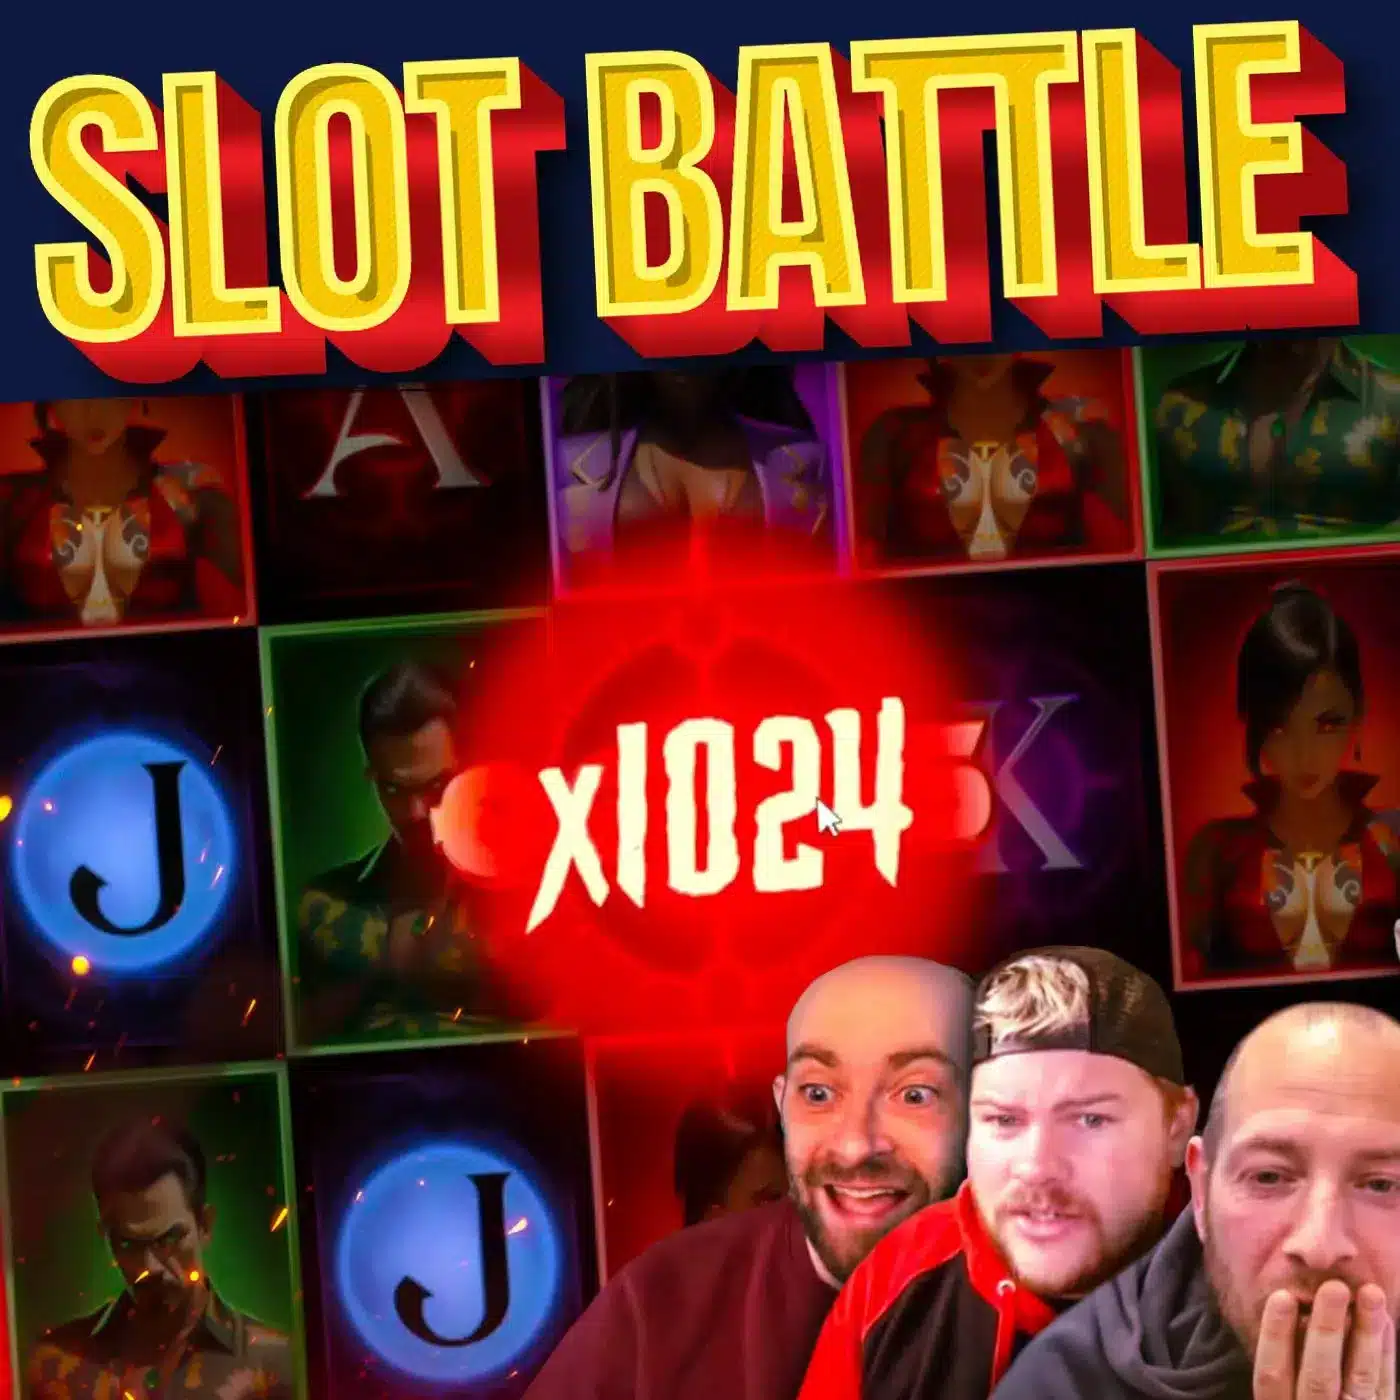 Slot Battle Sunday!! NEW SLOTS SPECIAL! Space Donkey, Benny The Beer And MORE!!